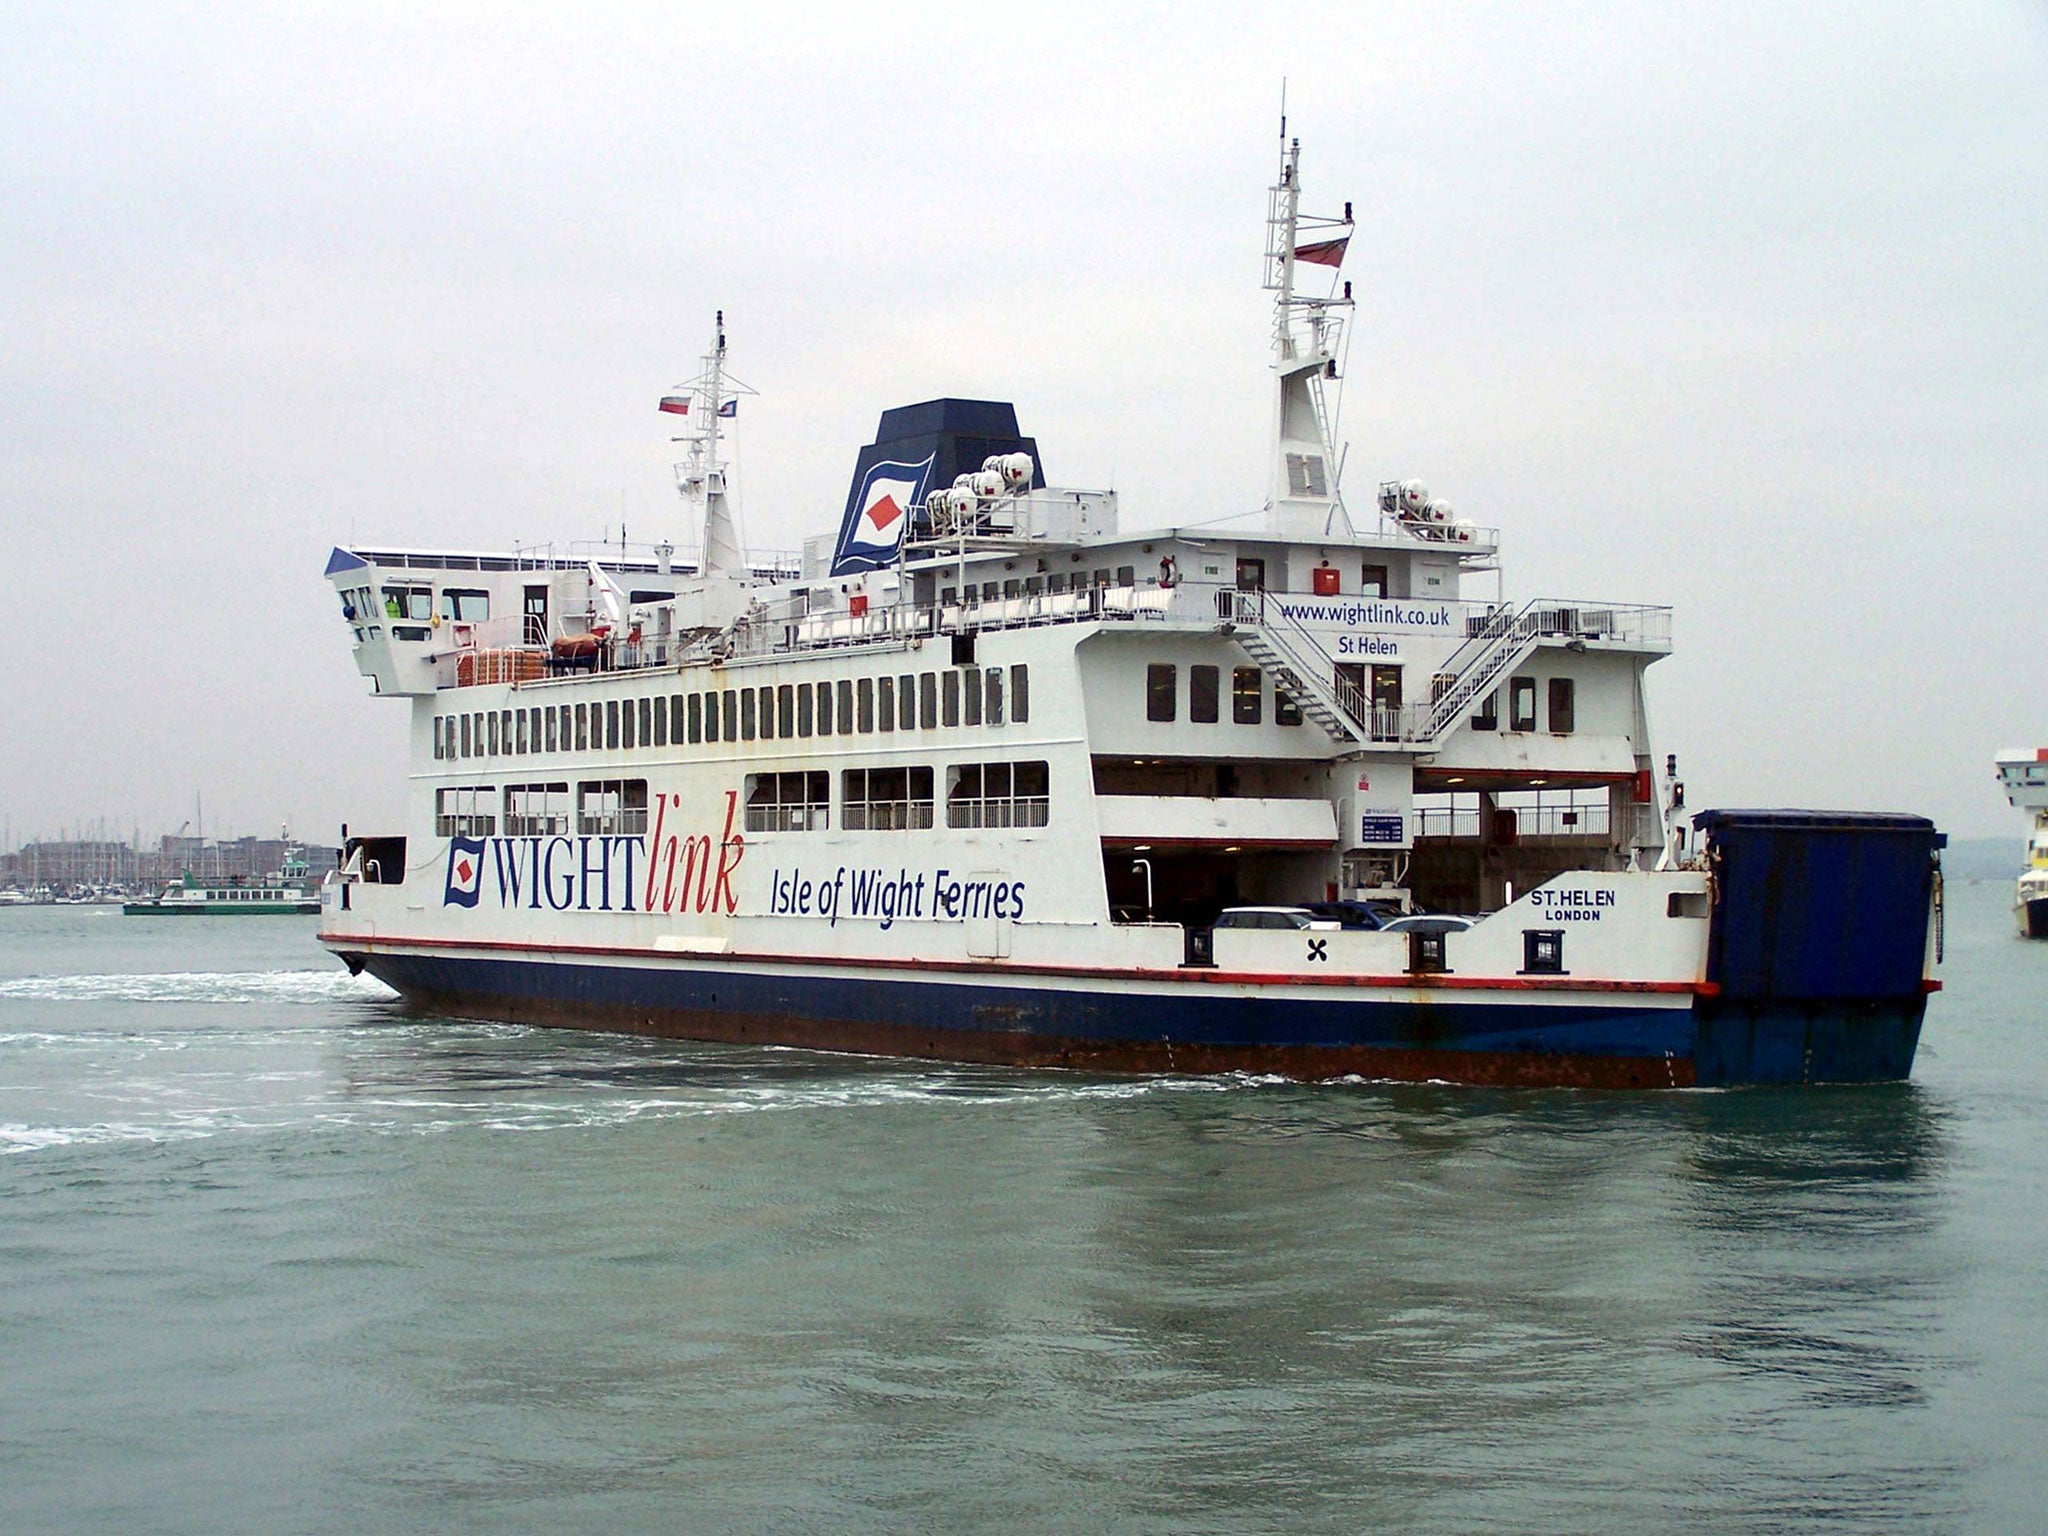 The forward mezzanine deck of the St Helen car ferry collapsed and injured four people